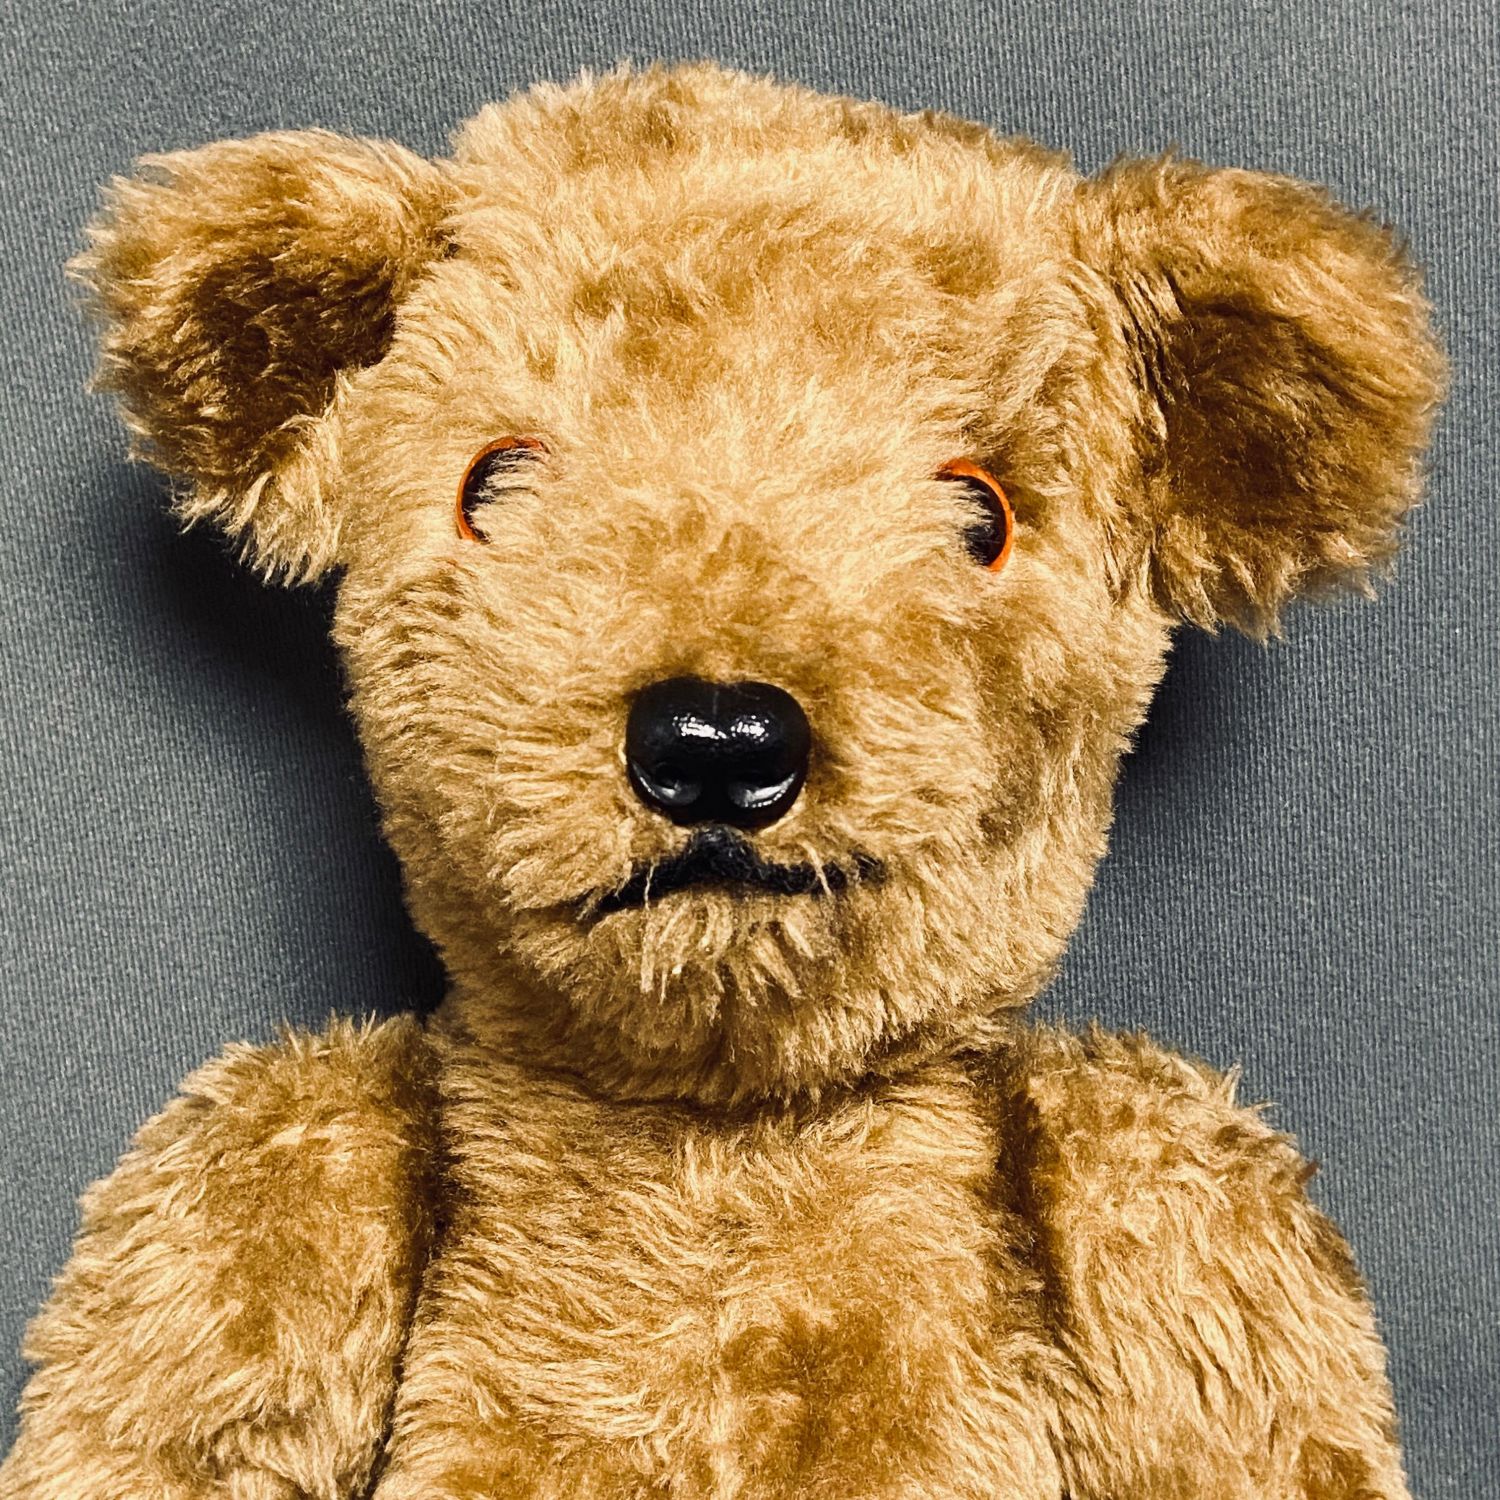 Vintage Jointed Teddy Bear Vintage Toys And Games Hemswell Antique